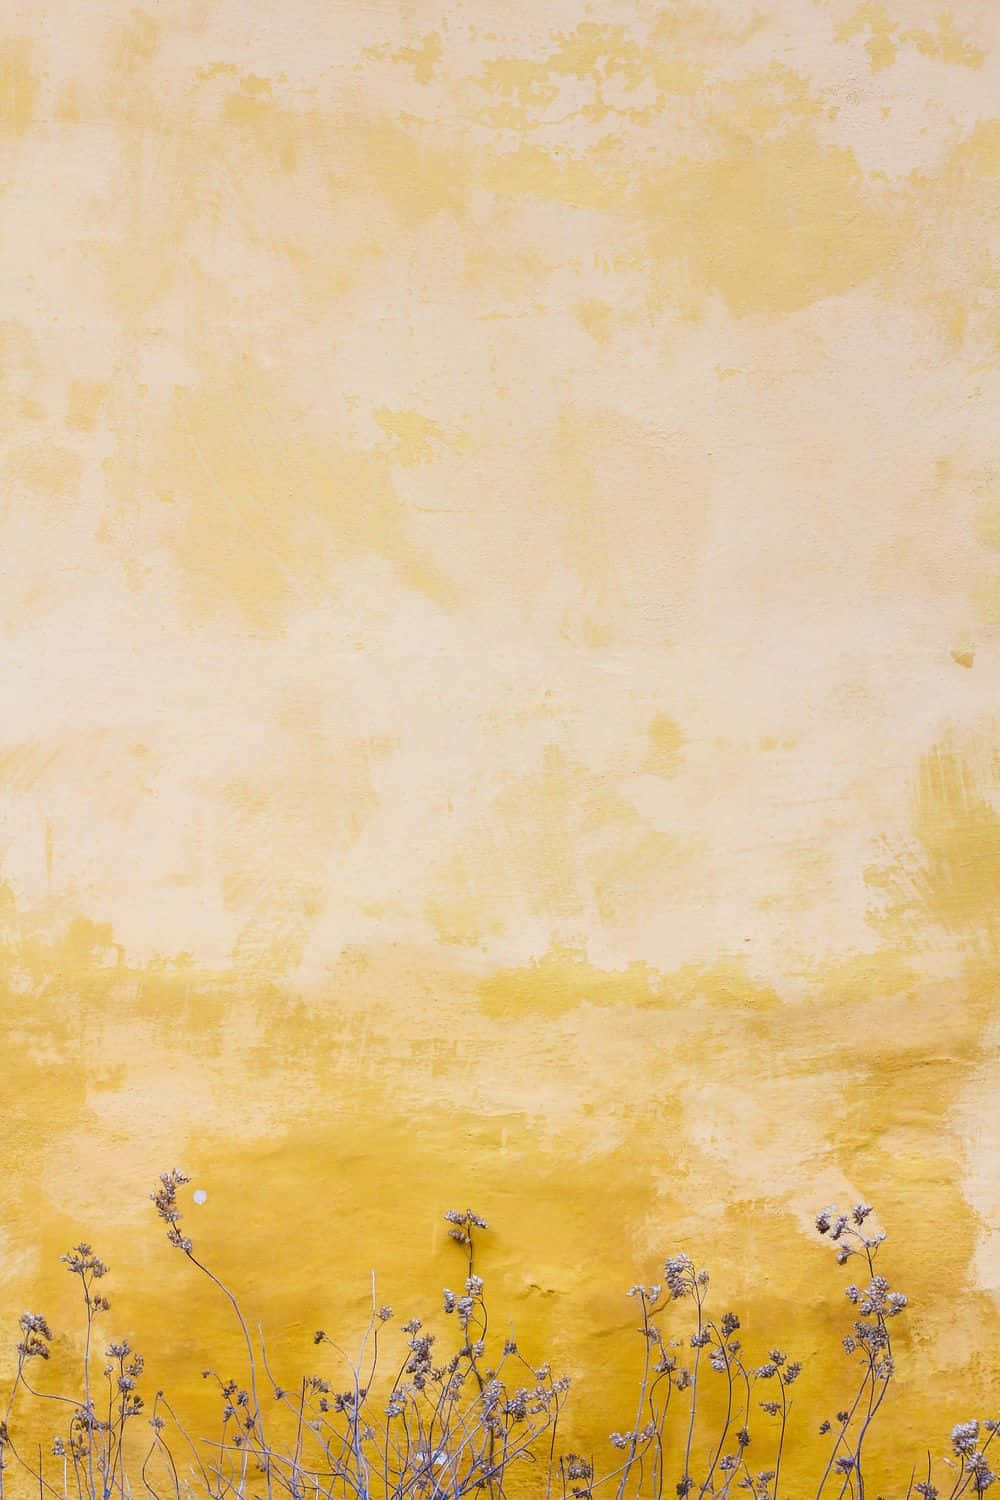 Caption: Vibrant Yellow Abstract Painting Wallpaper